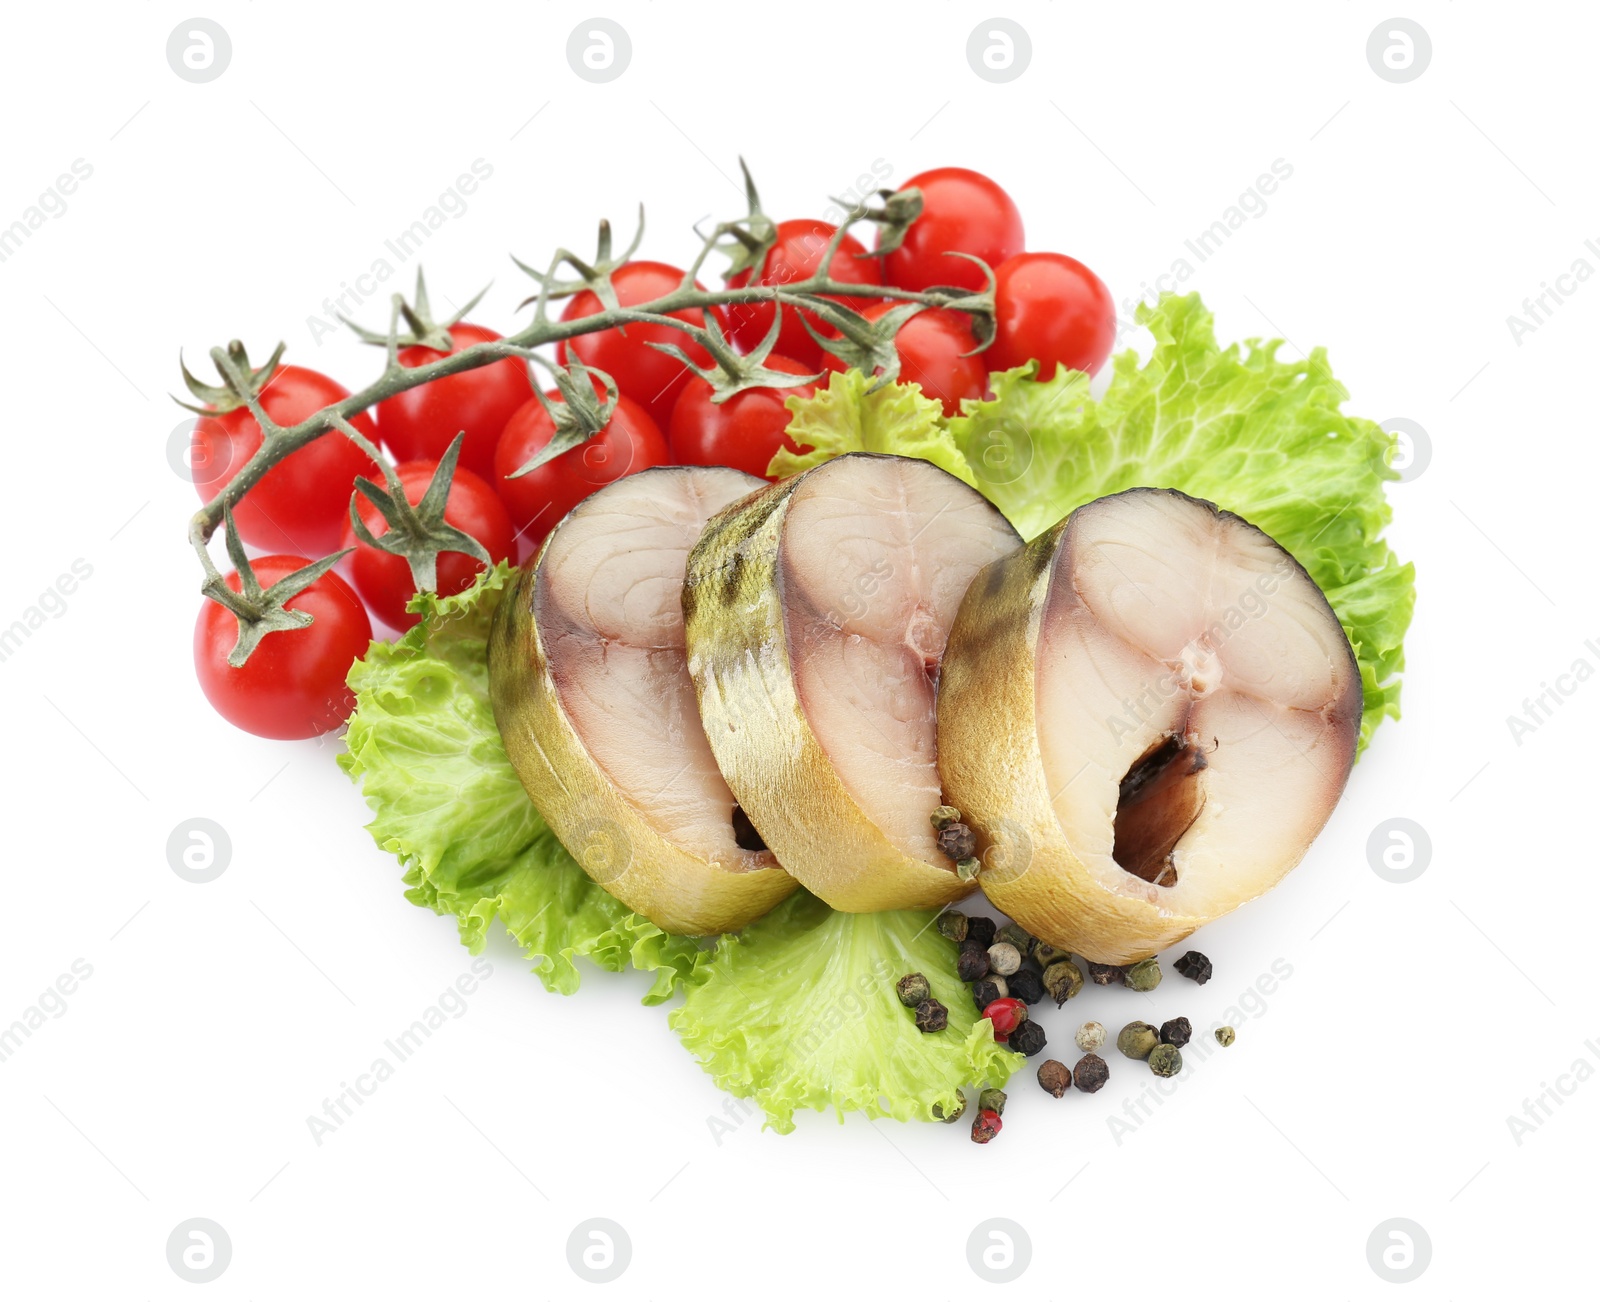 Photo of Slices of tasty smoked mackerel with tomatoes, lettuce and peppercorns on white background